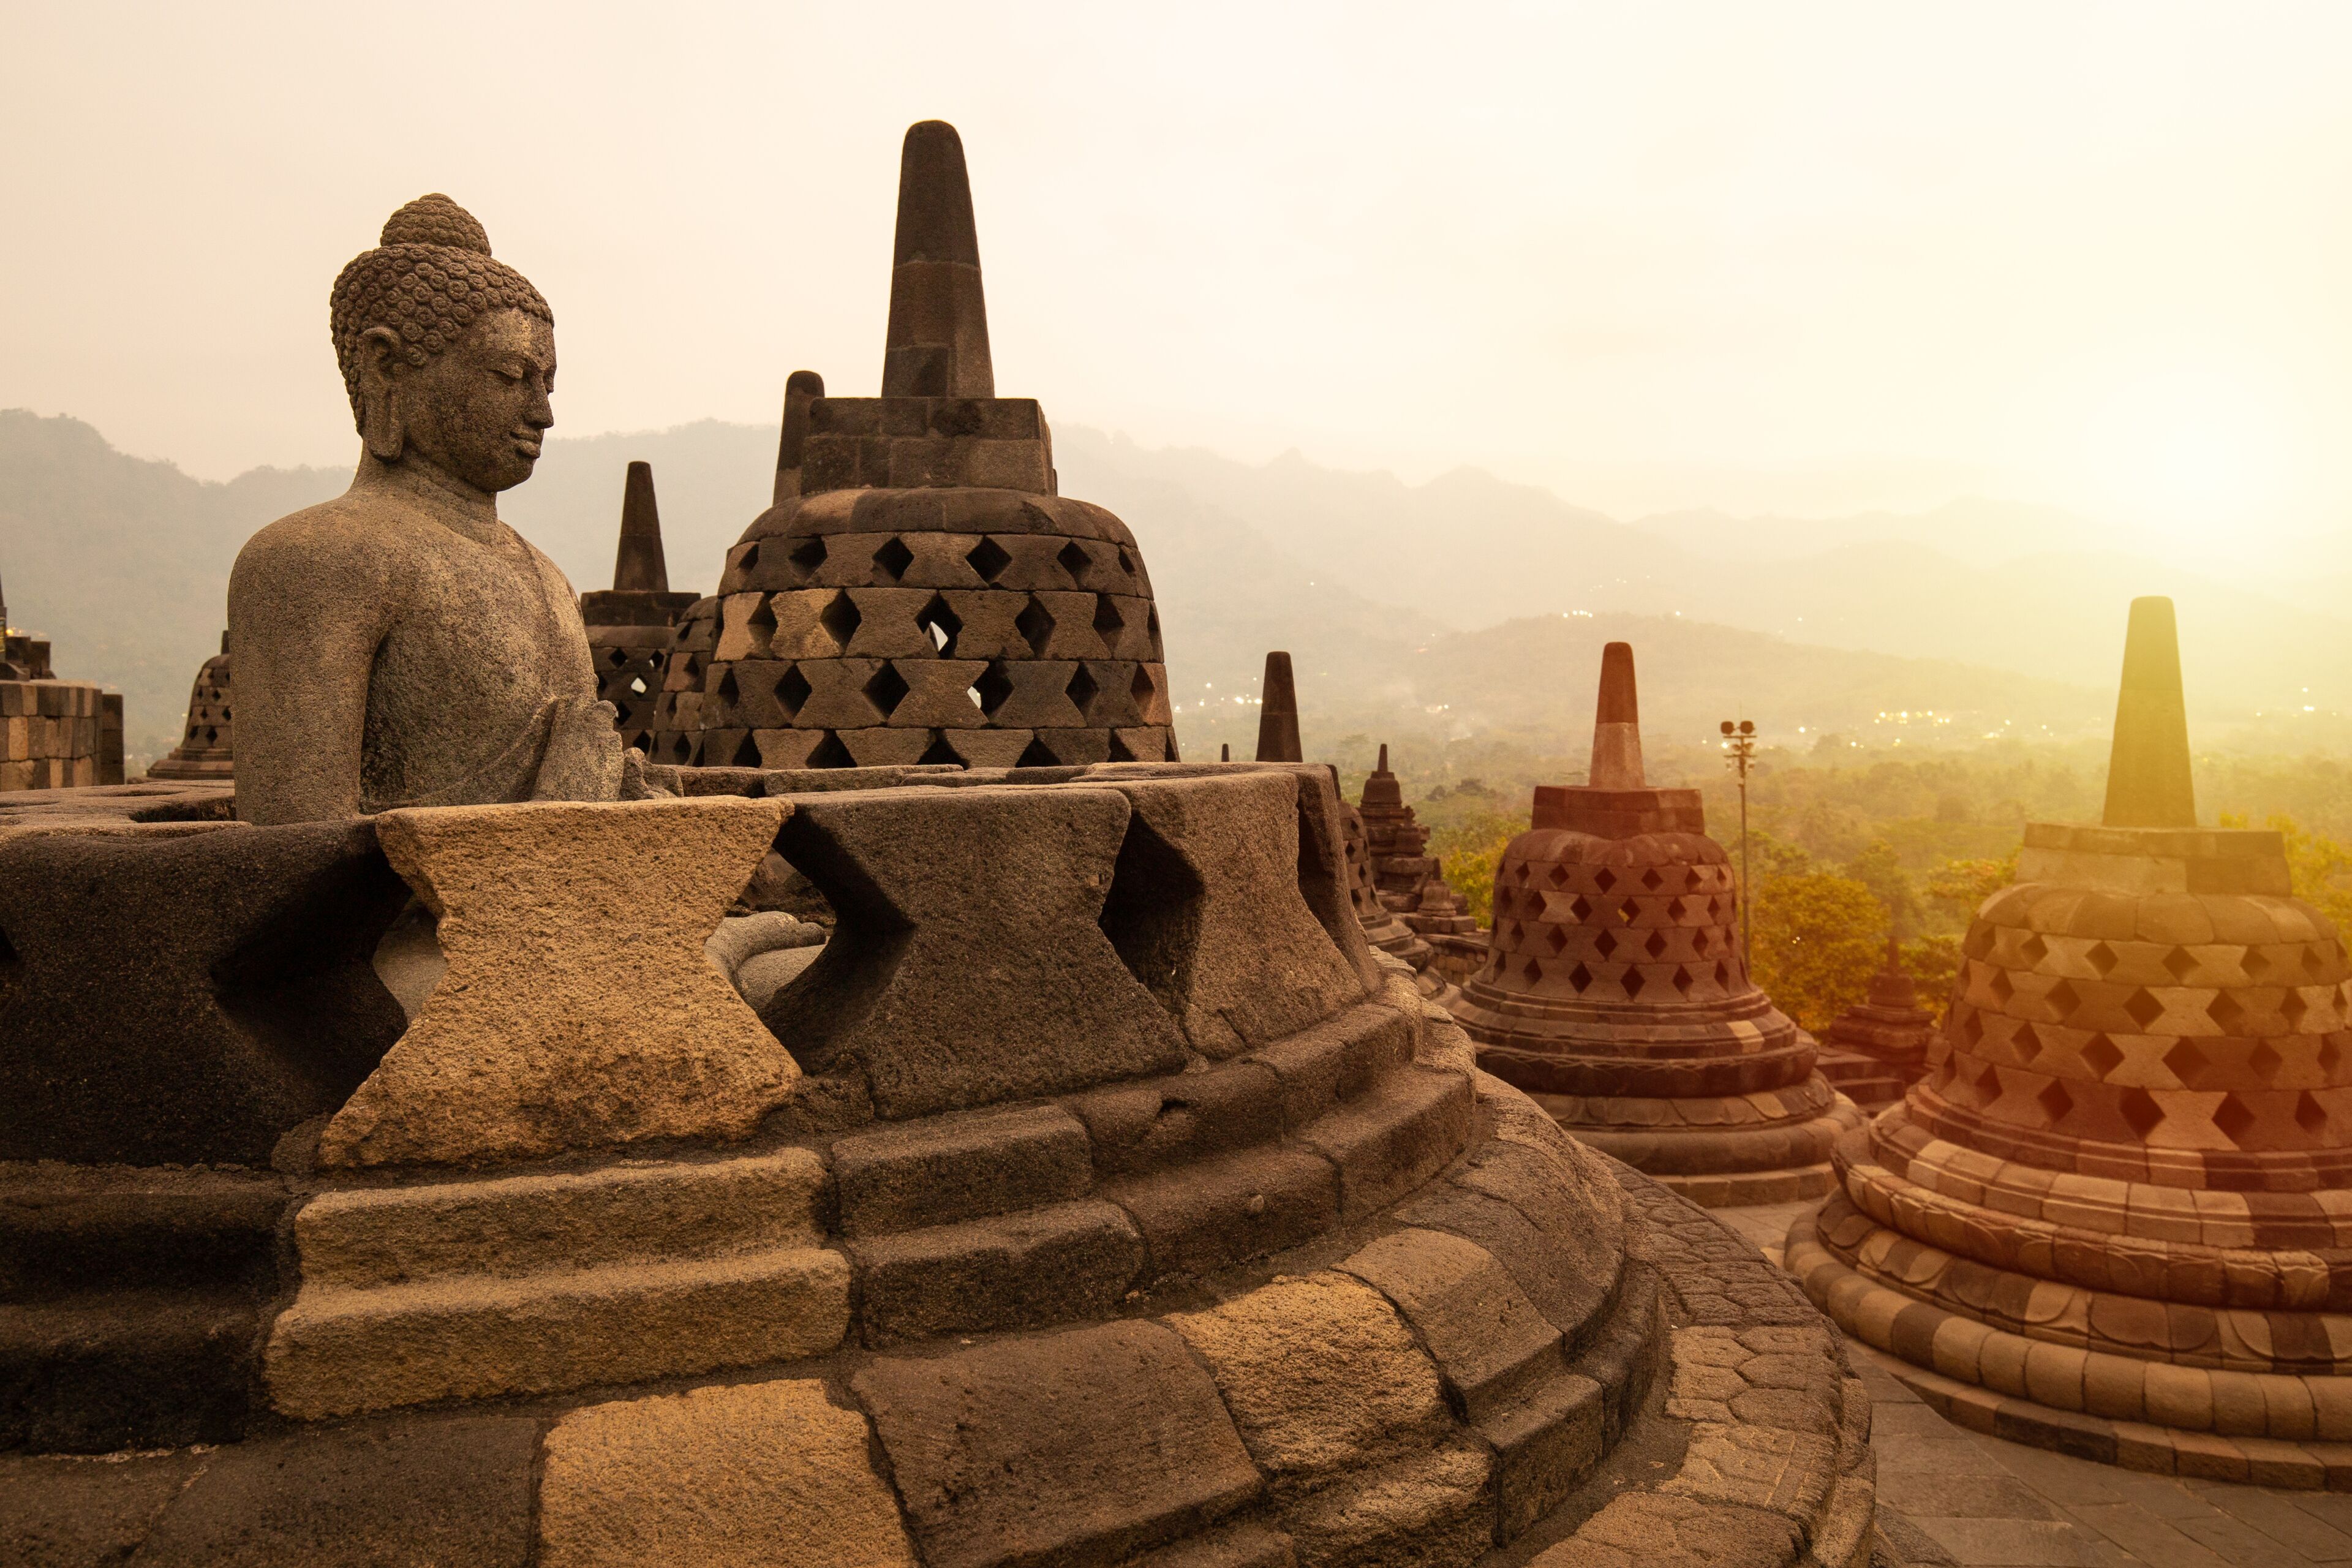 The ageless Borobudur temple is buddhist temple built in 9th century. One of the world's wonder, listed as UNESCO world heritage site.